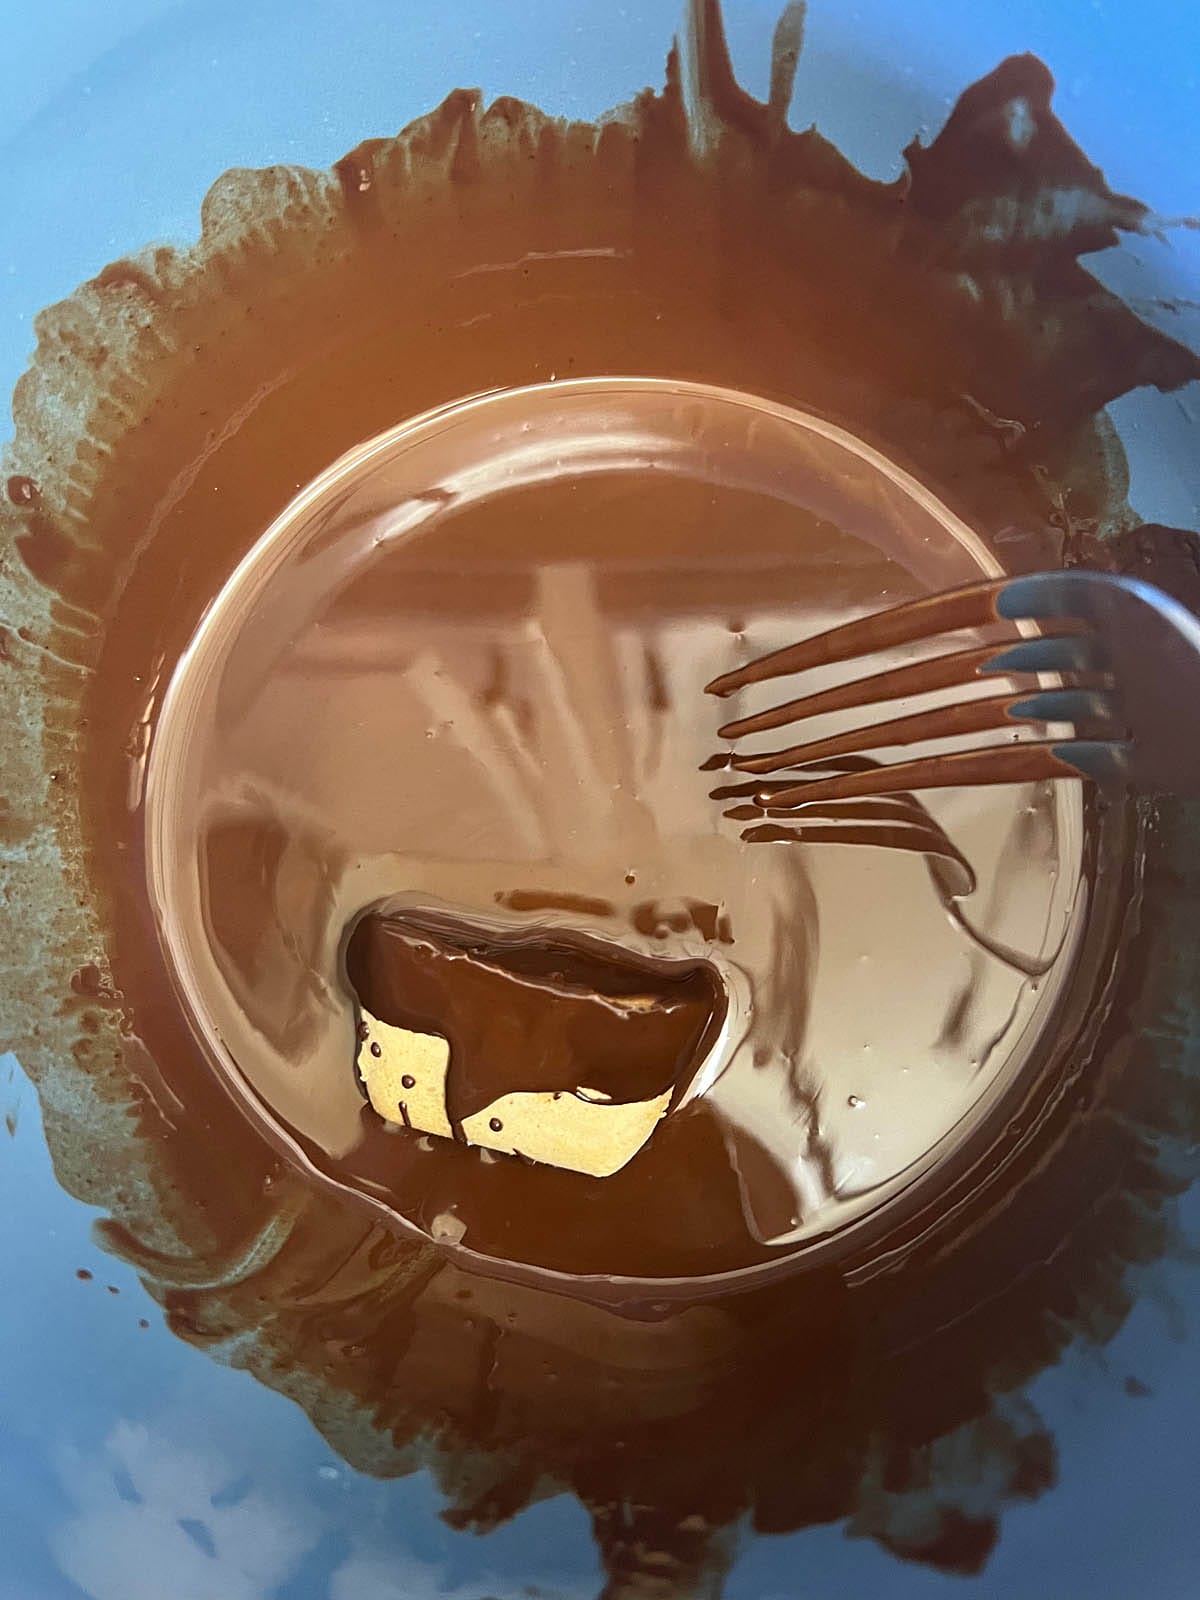 Frozen peanut butter bite in bowl of melted chocolate with fork.